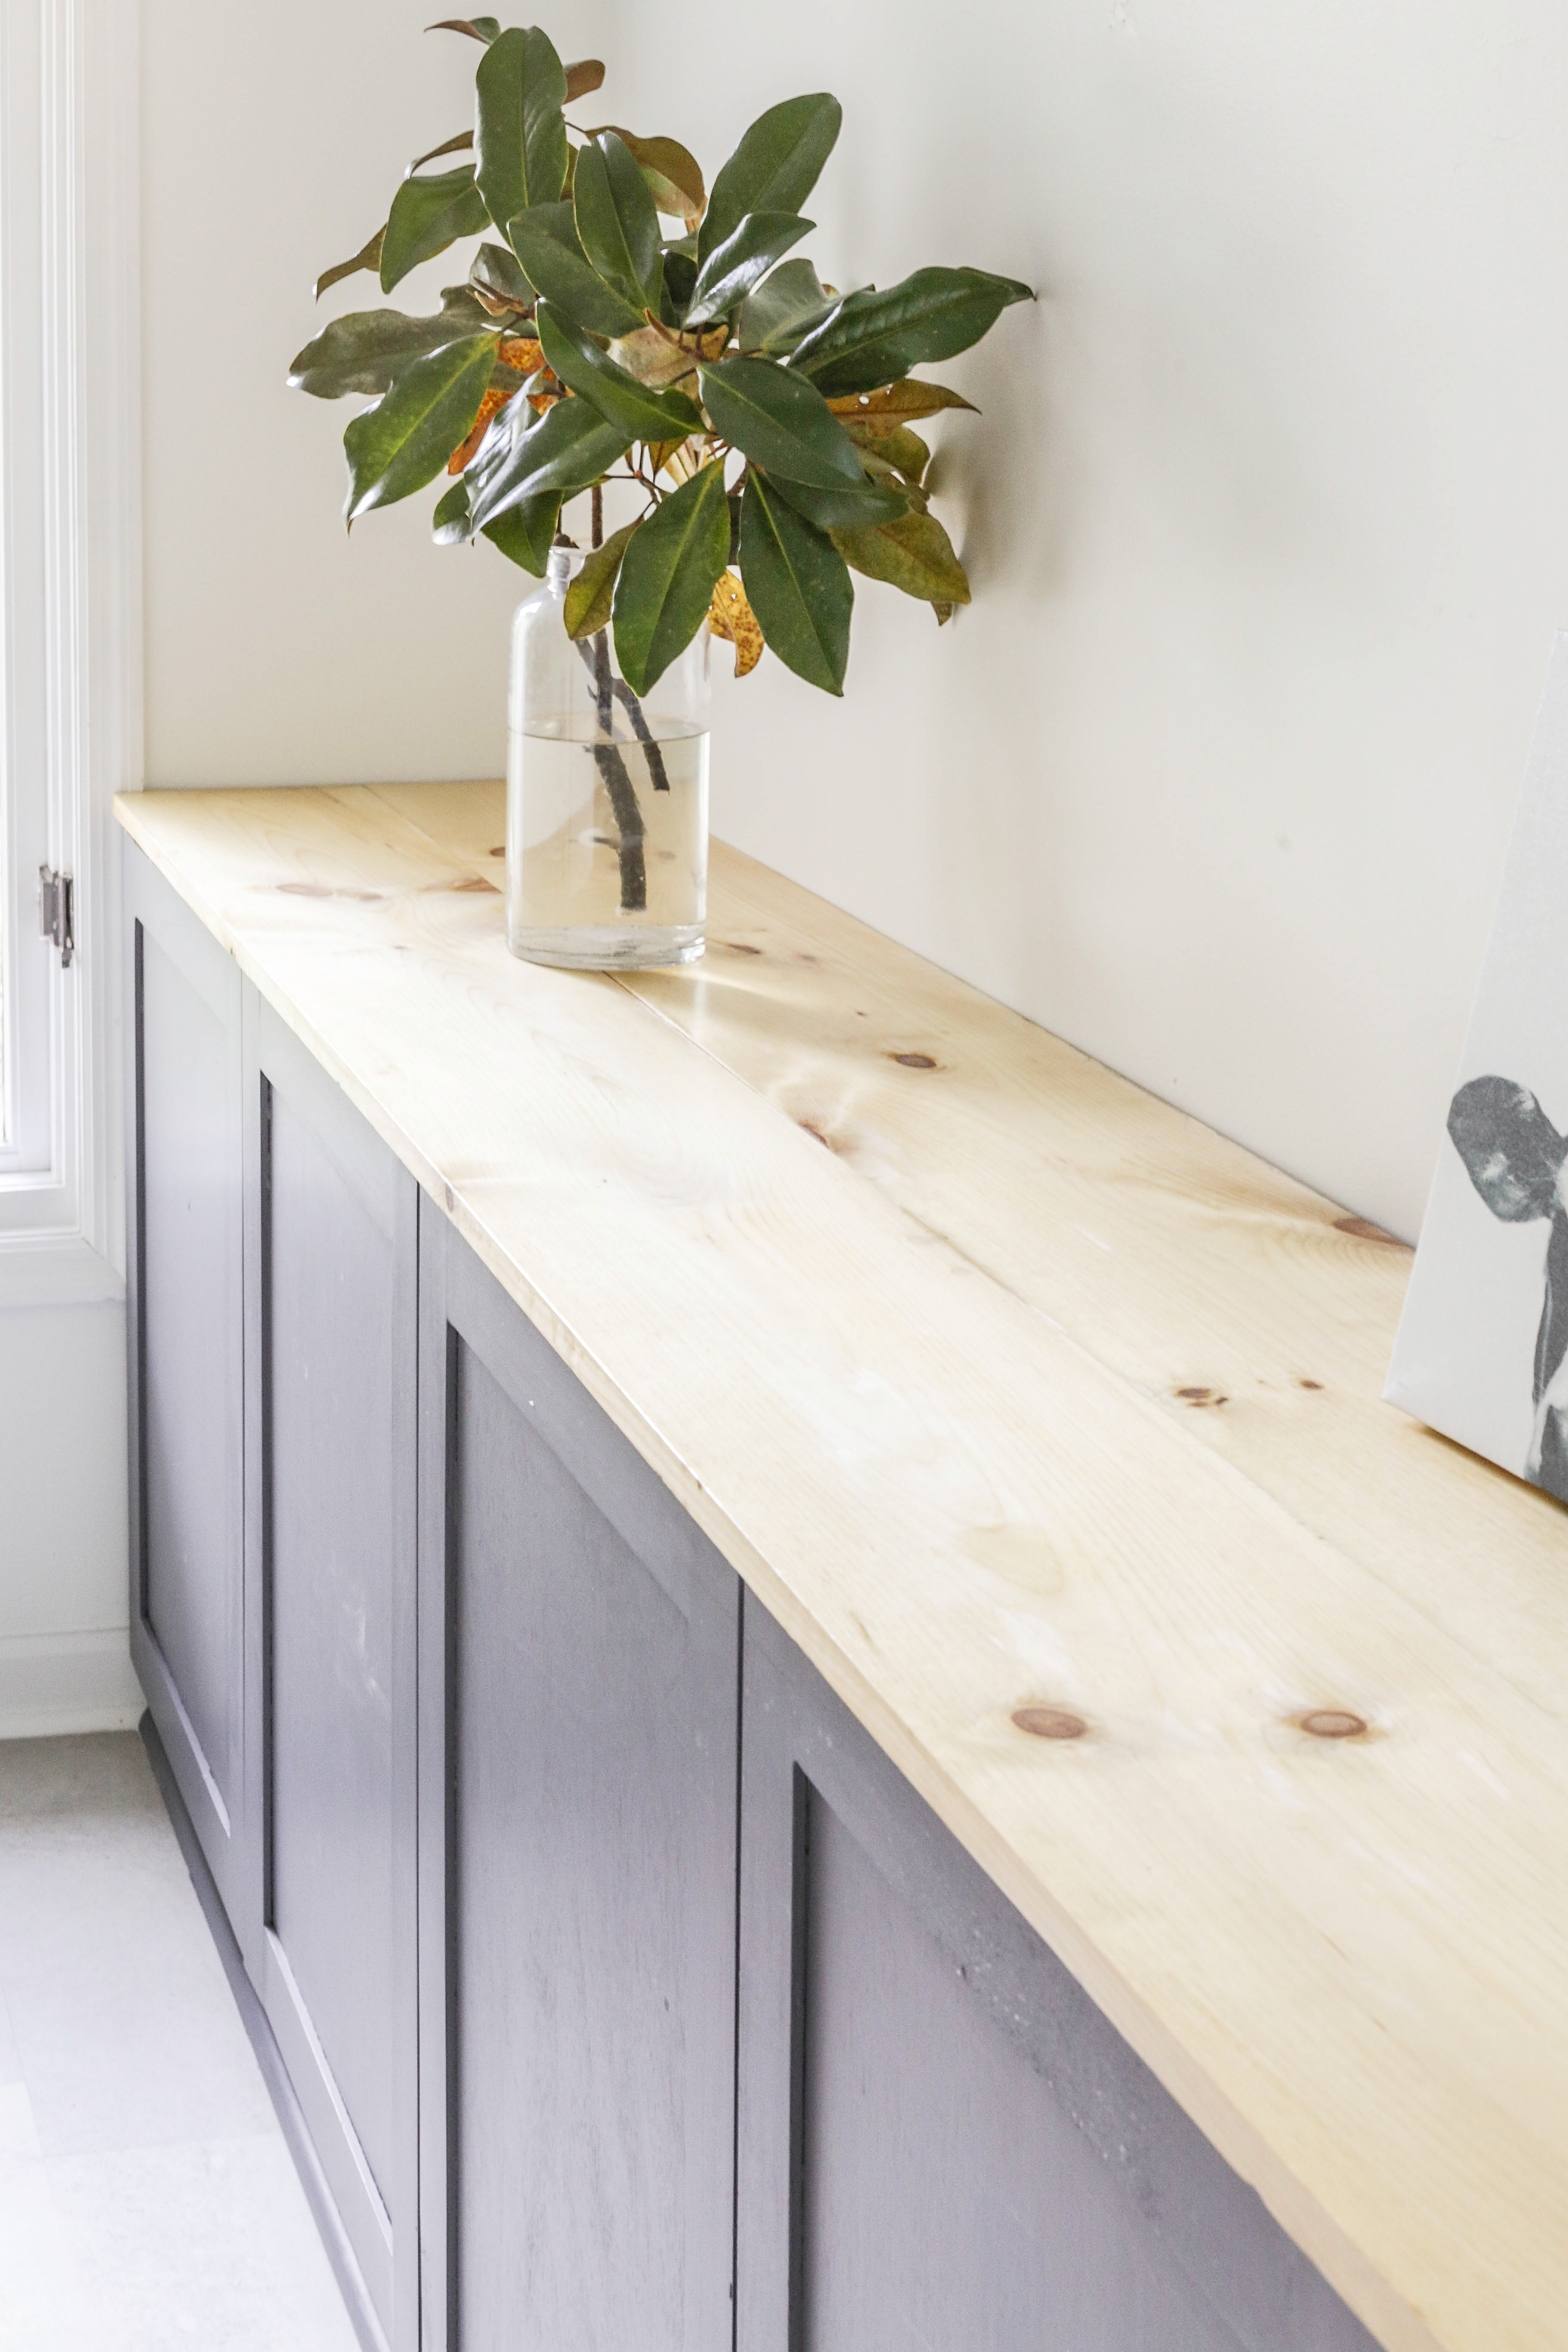 Diy Wood Countertops For Under 50, How To Make A Wooden Countertop